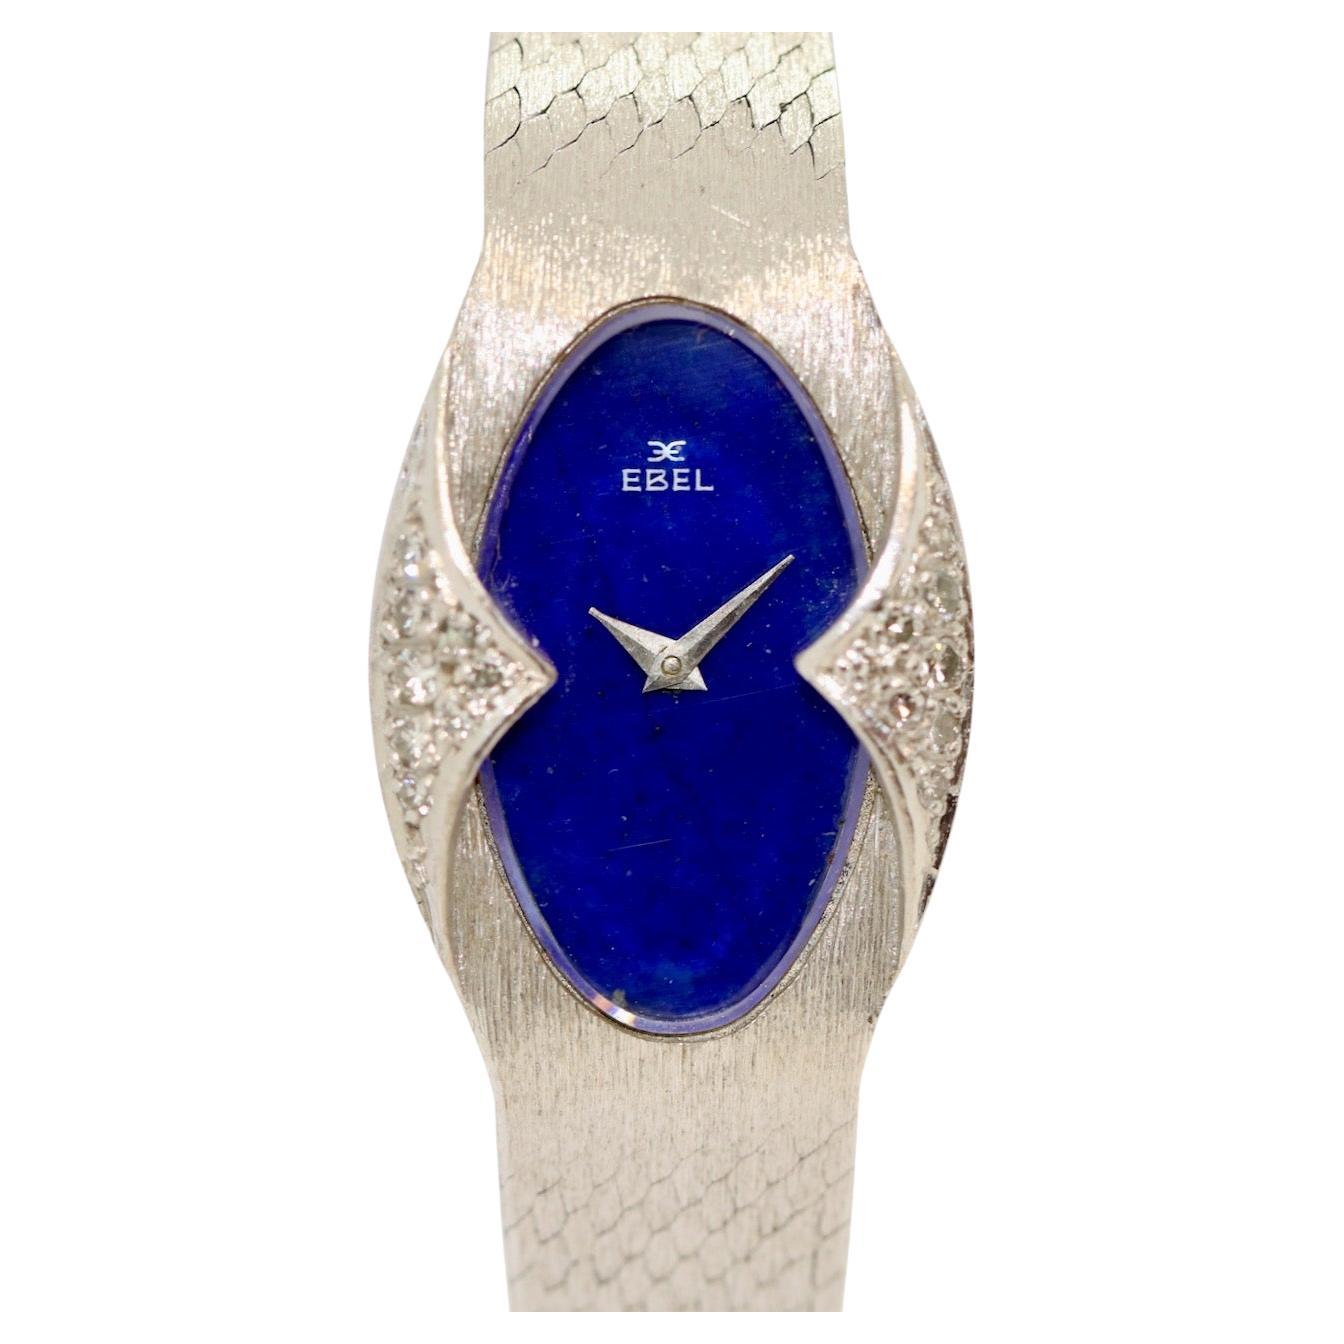 18 Karat White Gold Ladies Wrist Watch by EBEL, with Diamonds and Lapis Dial